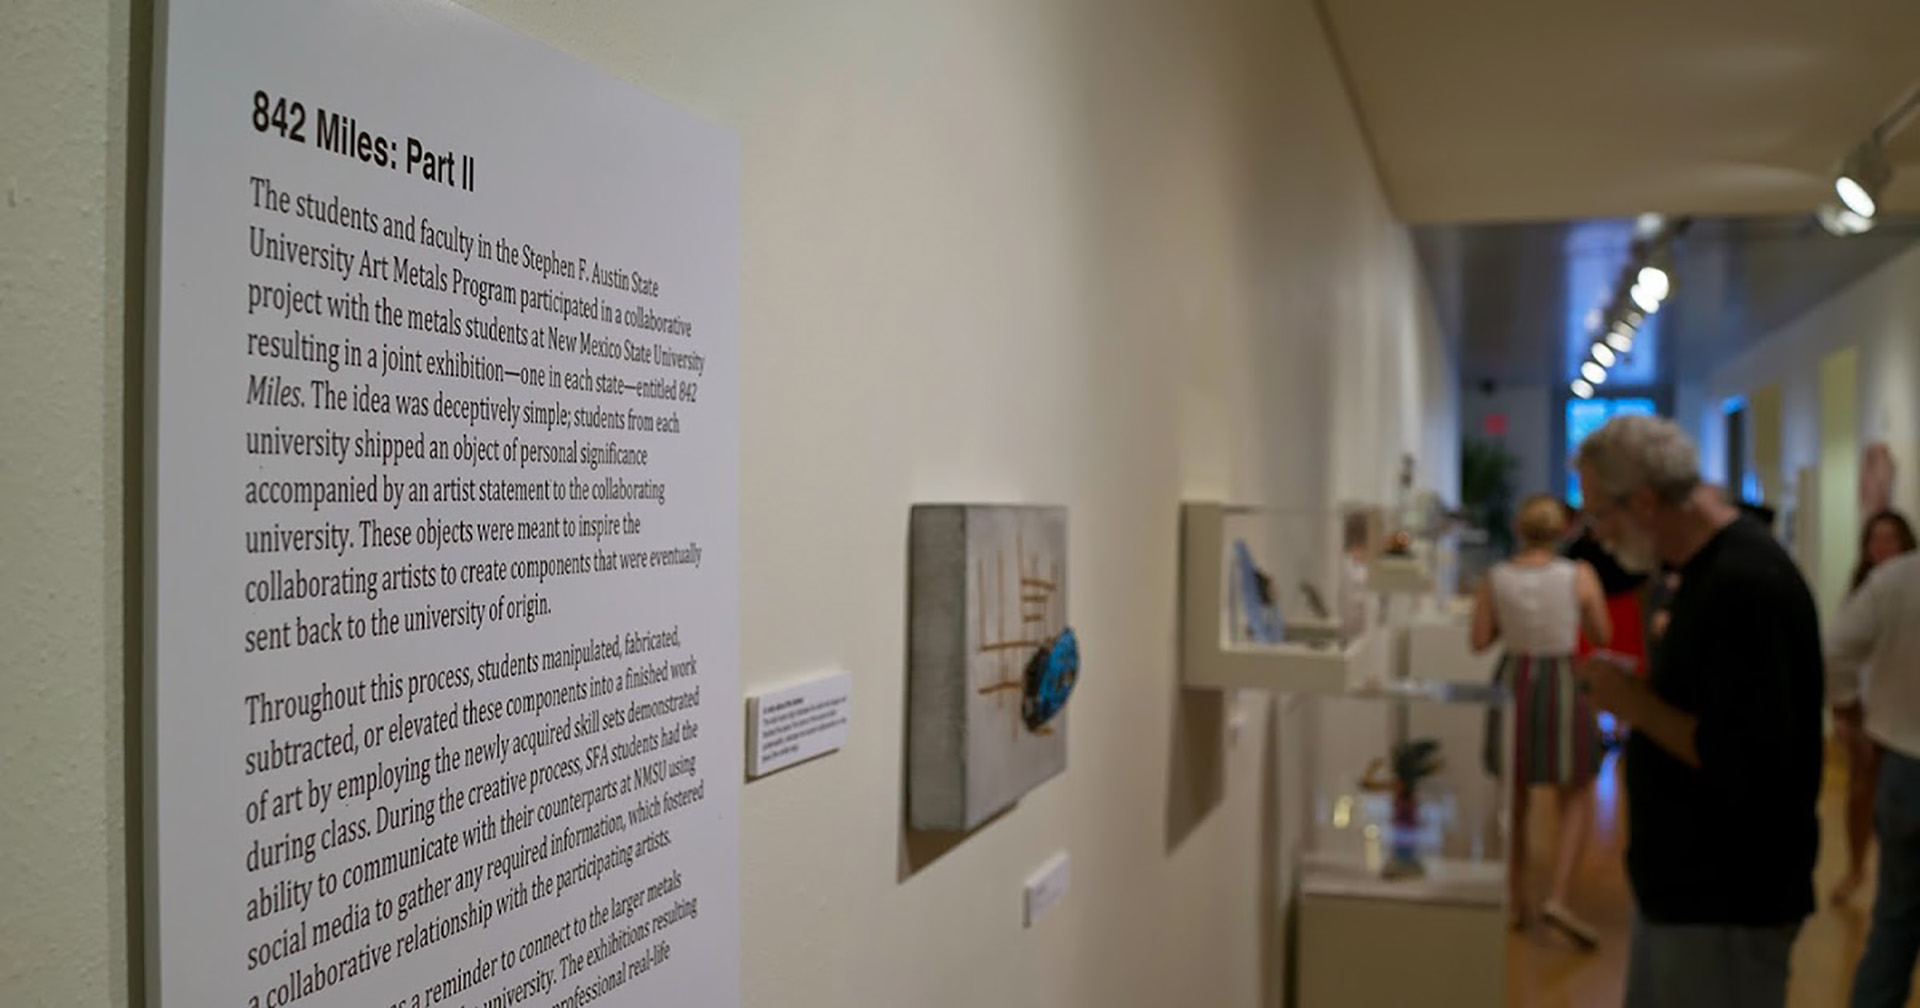 photo of an art exhibition: in the foreground is an artist's statement on the wall, and then receding into an out-of-focus background are various artworks on exhibition